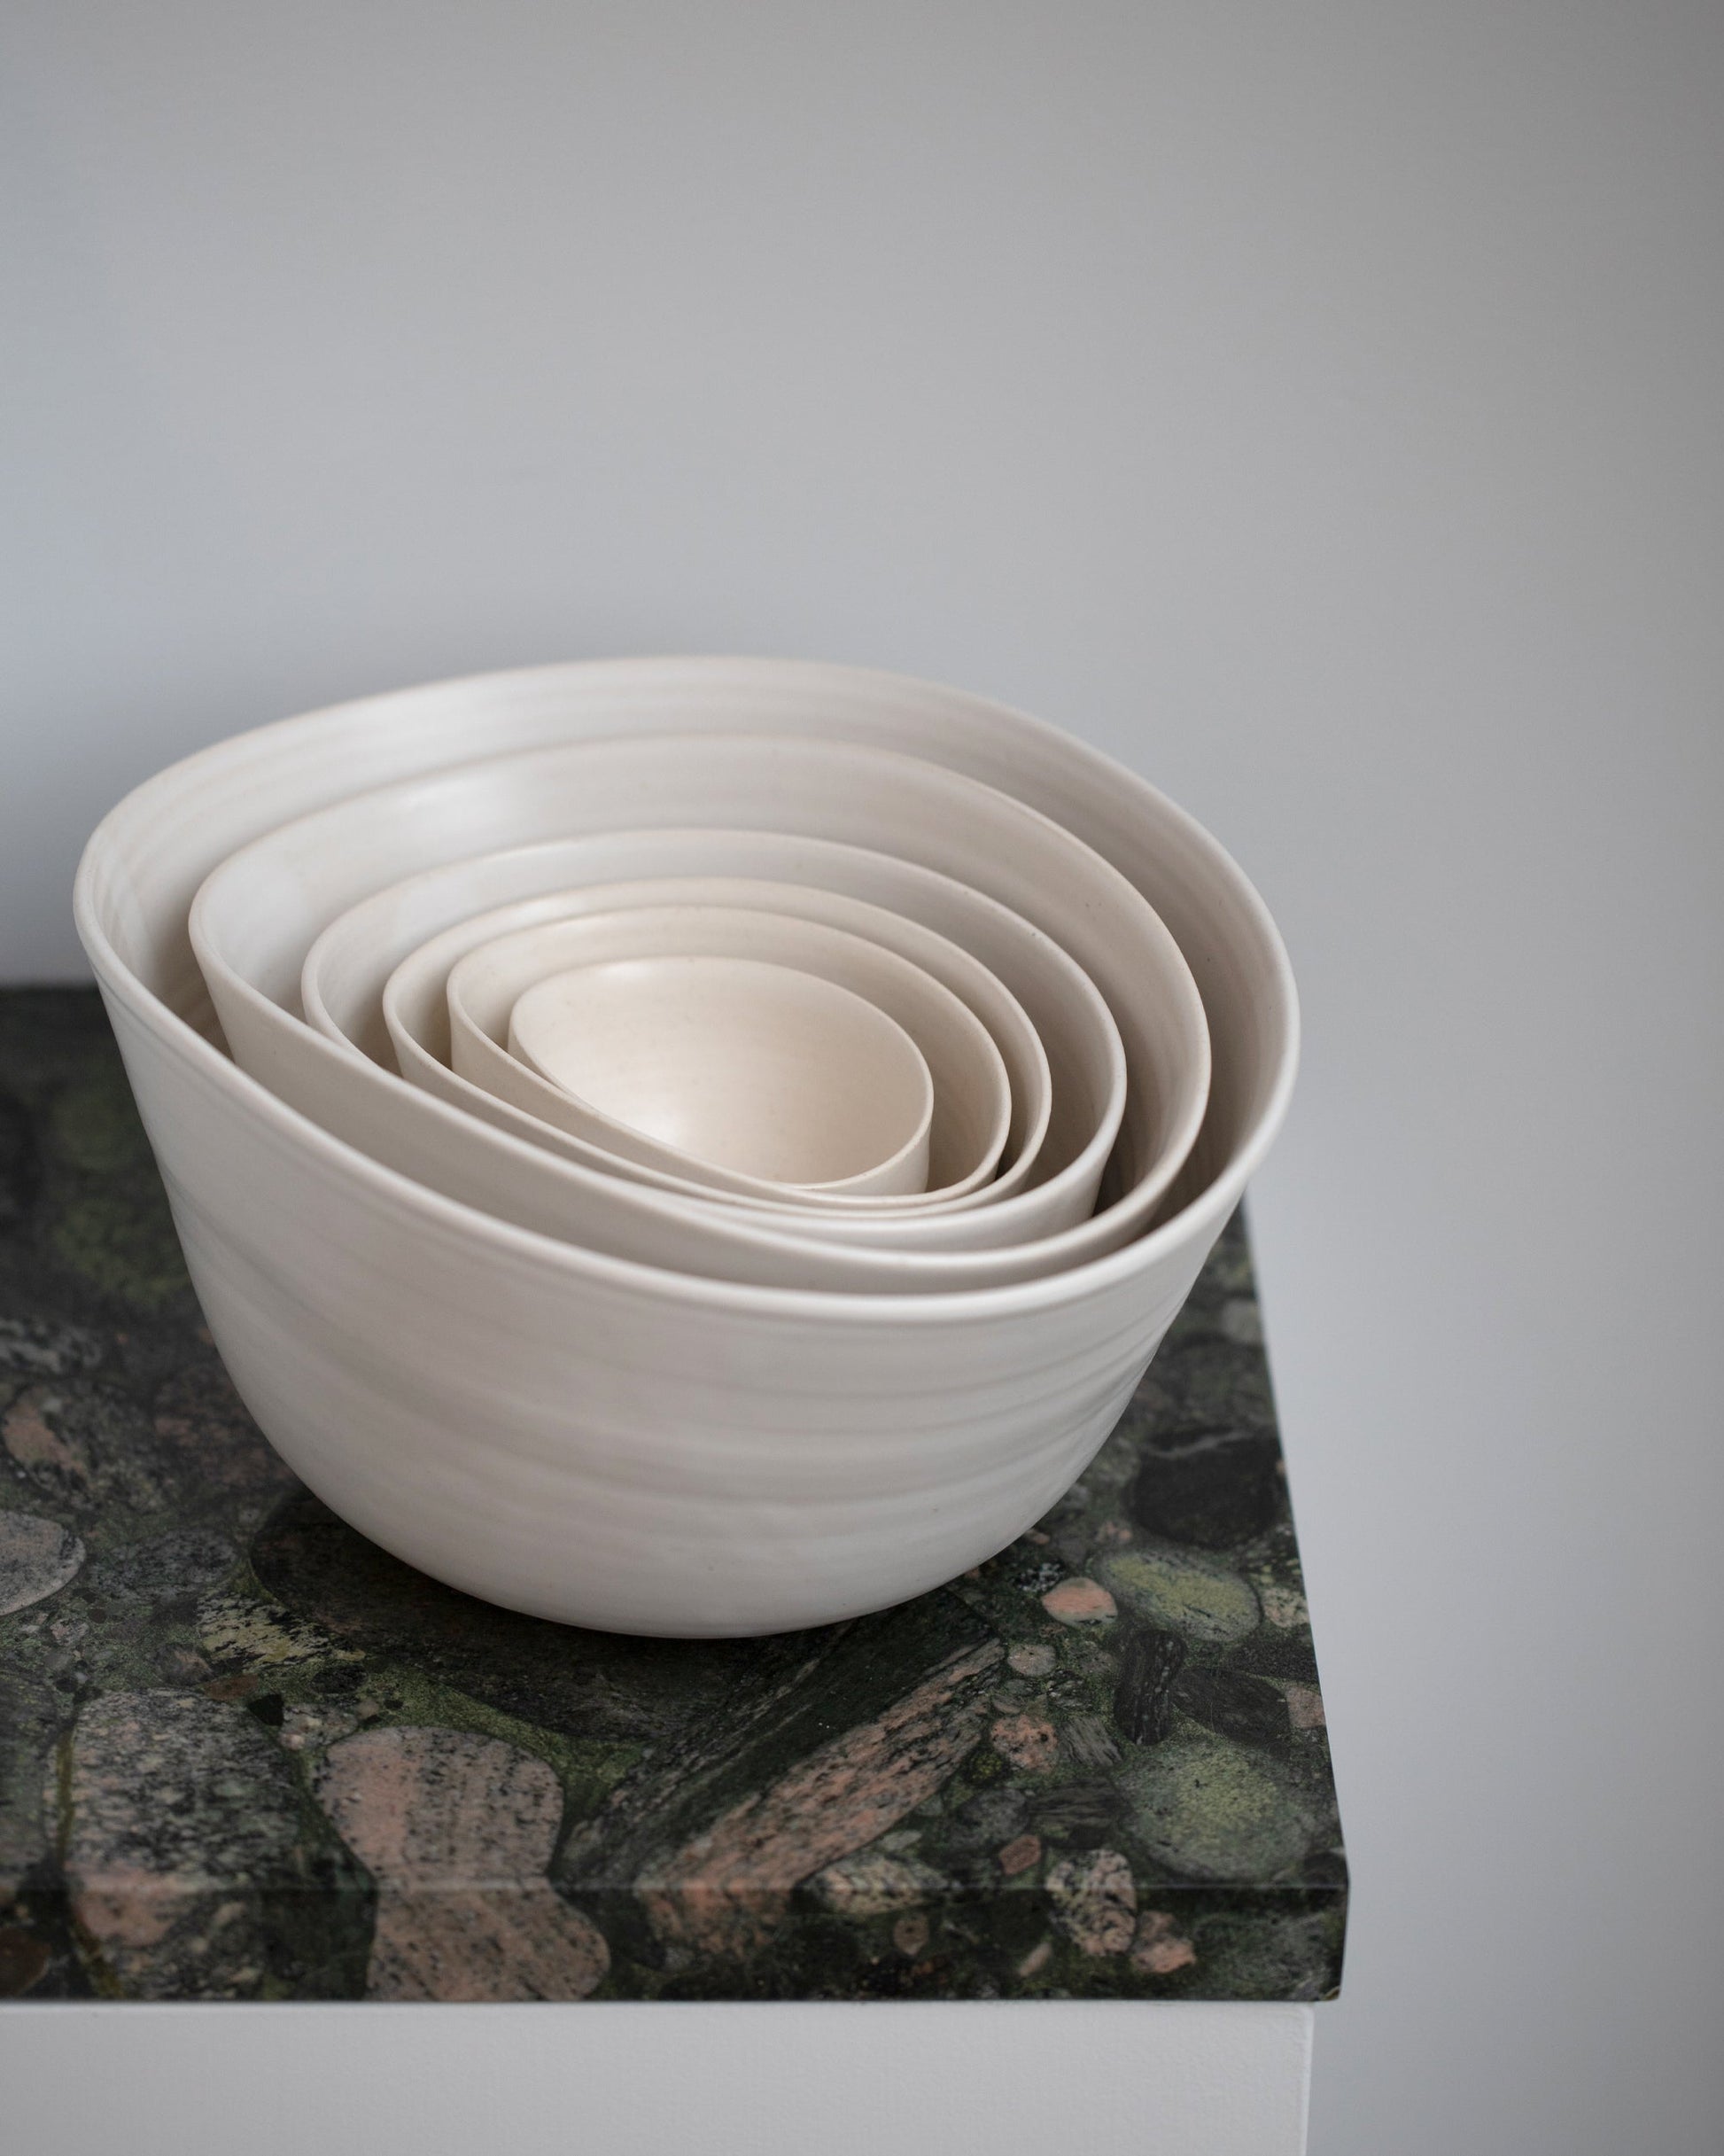 Styled image of a group of Eric Bonnin Off-White Sylvia Bowl #3, Sylvia Bowl #1/4, Sylvia Bowl #4, Sylvia Bowl #1/2, Sylvia Bowl #2 and Sylvia Bowl #1 on light color background.